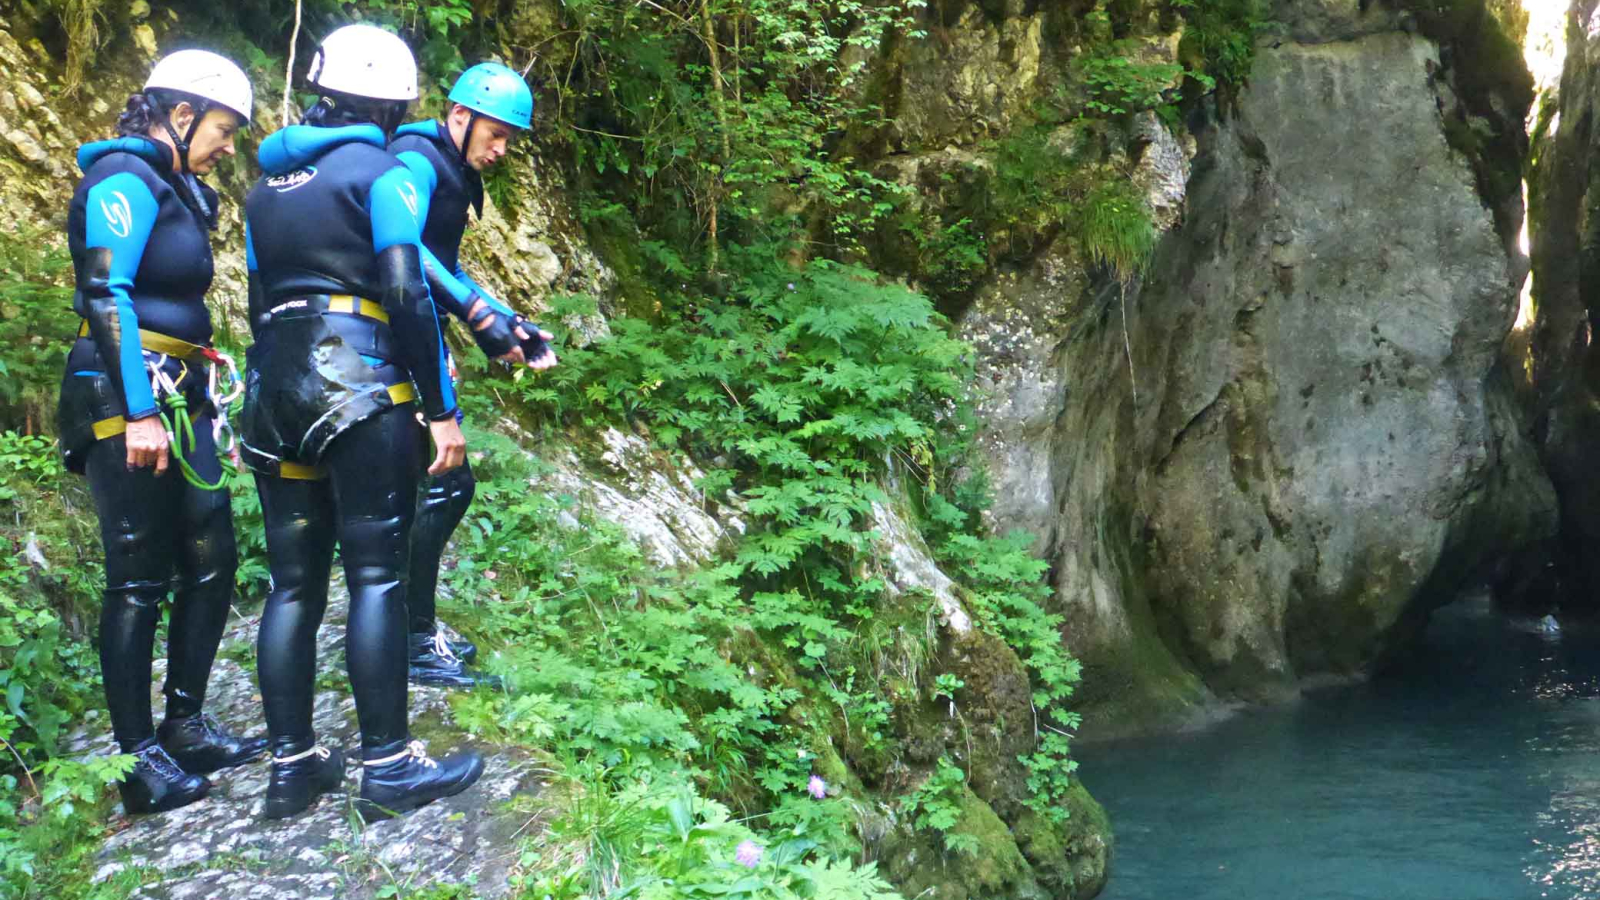 Canyoning as a family or with friends